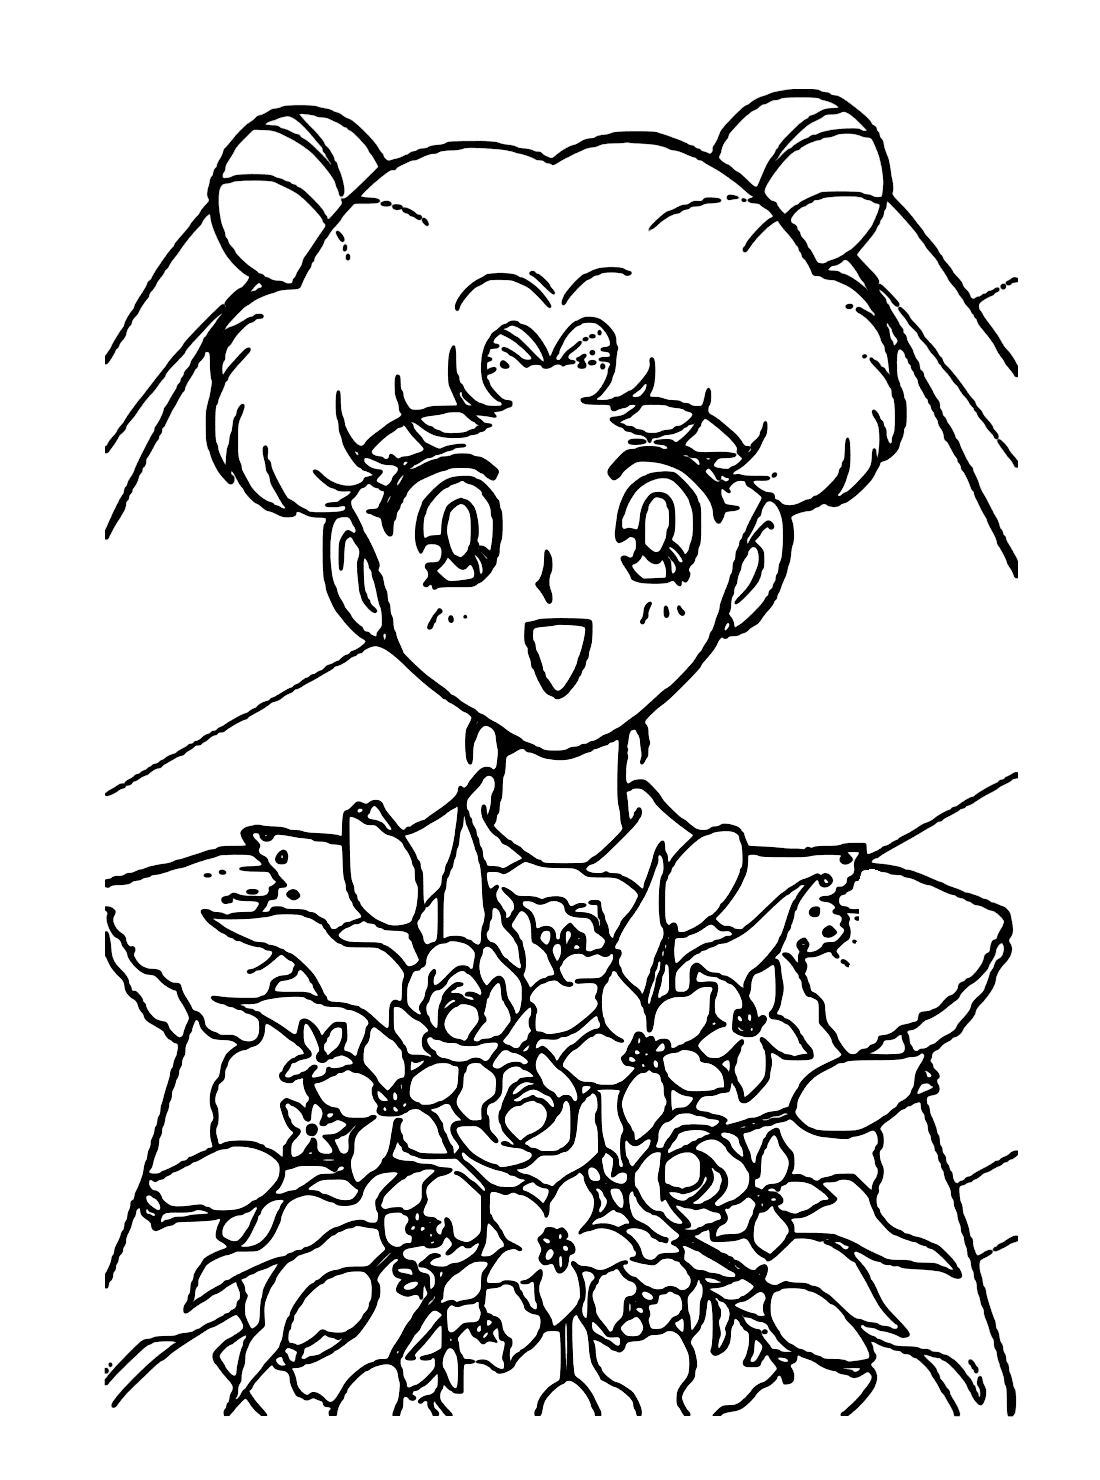 Adult Coloring Pages Chibi Sailor Moon